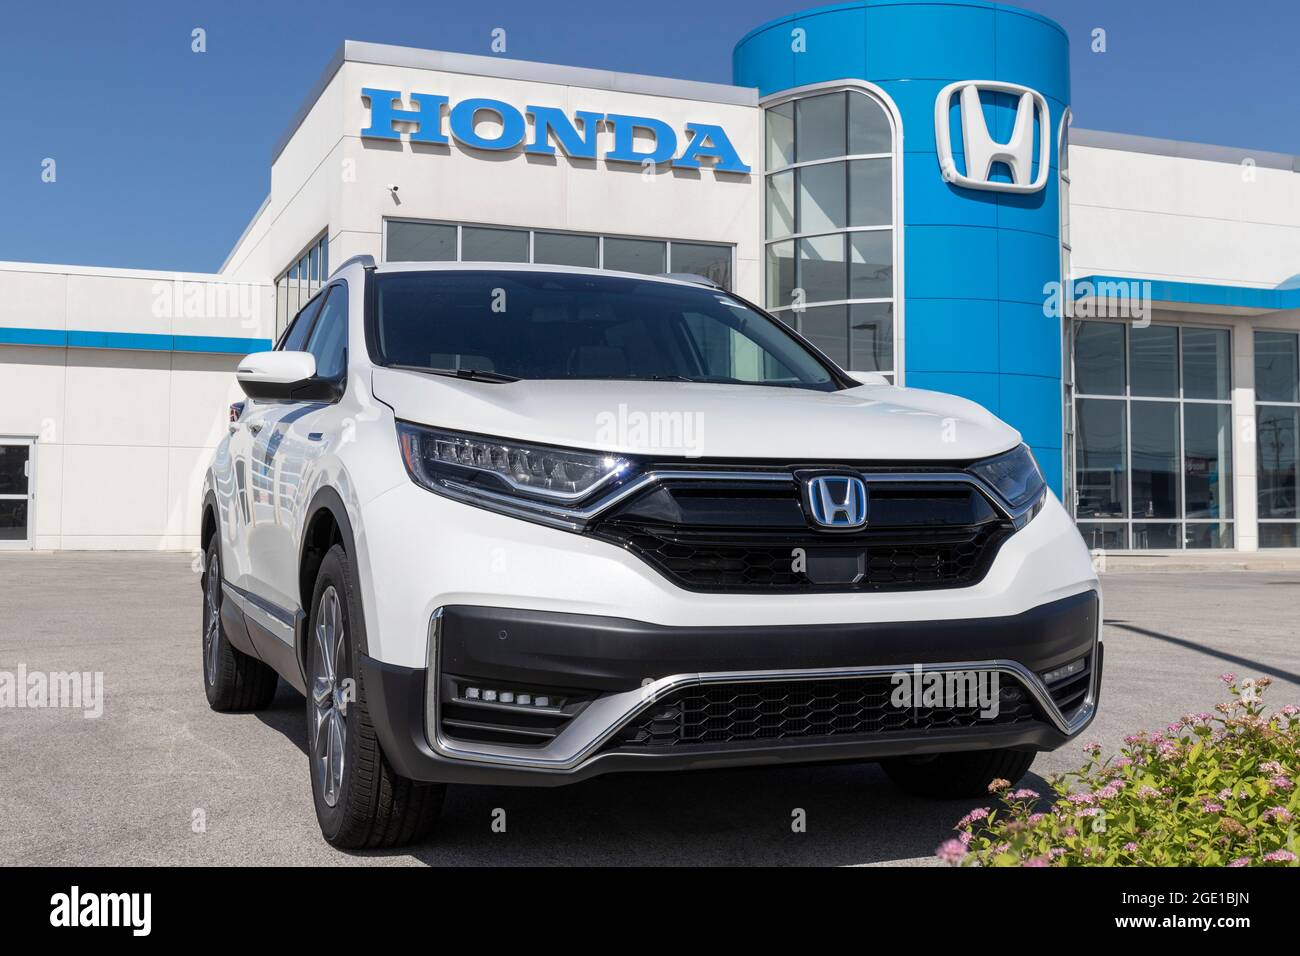 Kokomo - Circa August 2021: Honda CR-V Hybrid display. The Honda CR-V is one of the top 25 cars sold in the US every year. Stock Photo